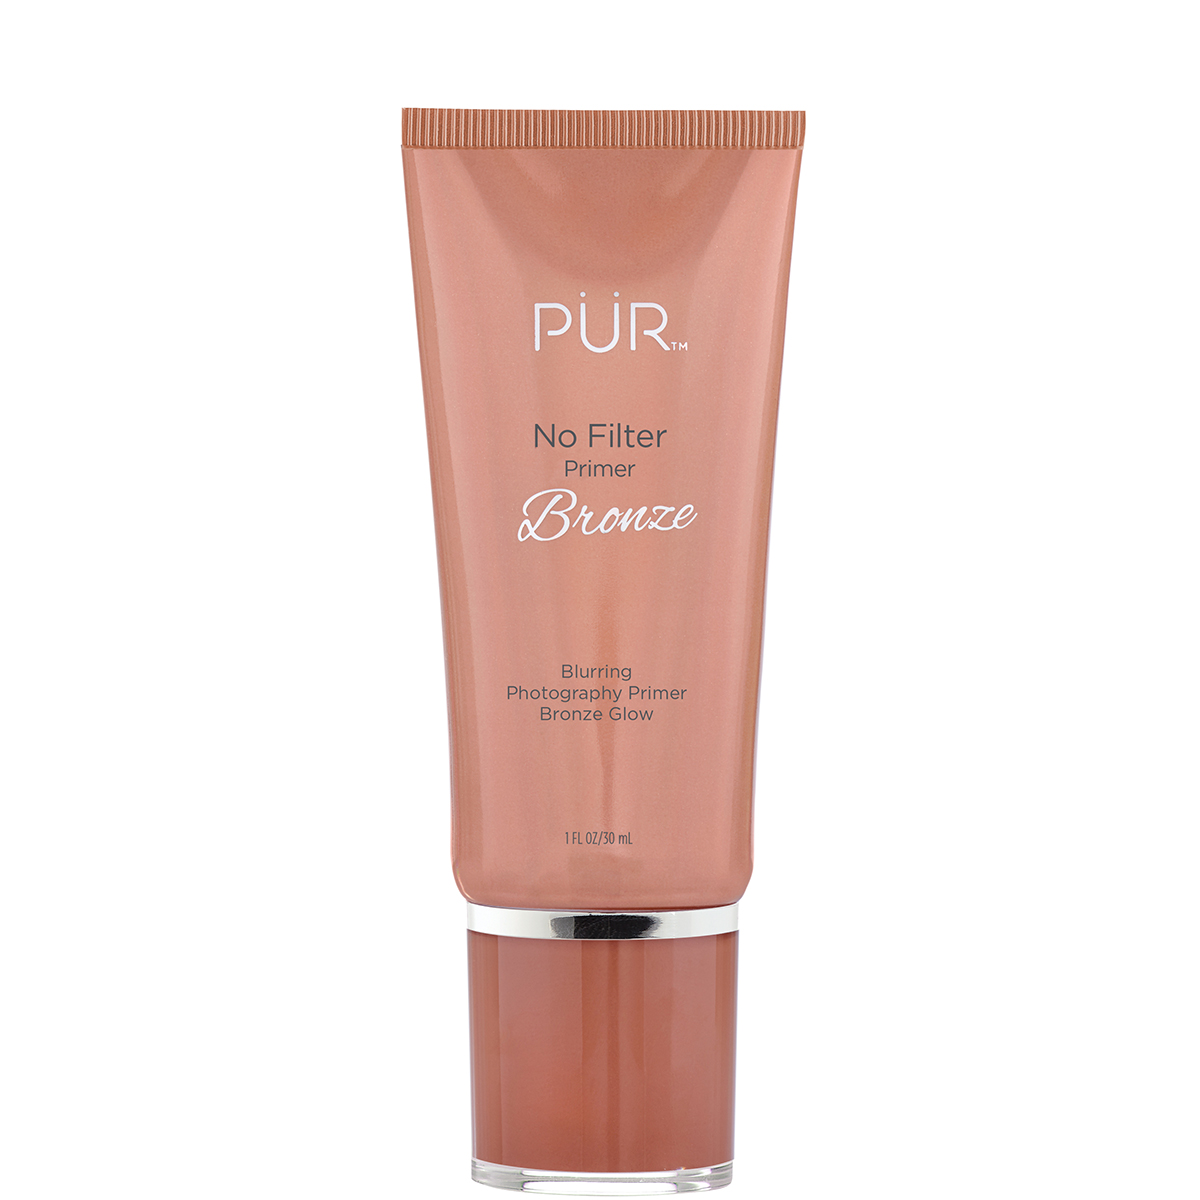 Pur No Filter Glow Blurring Photography Primer Bronze